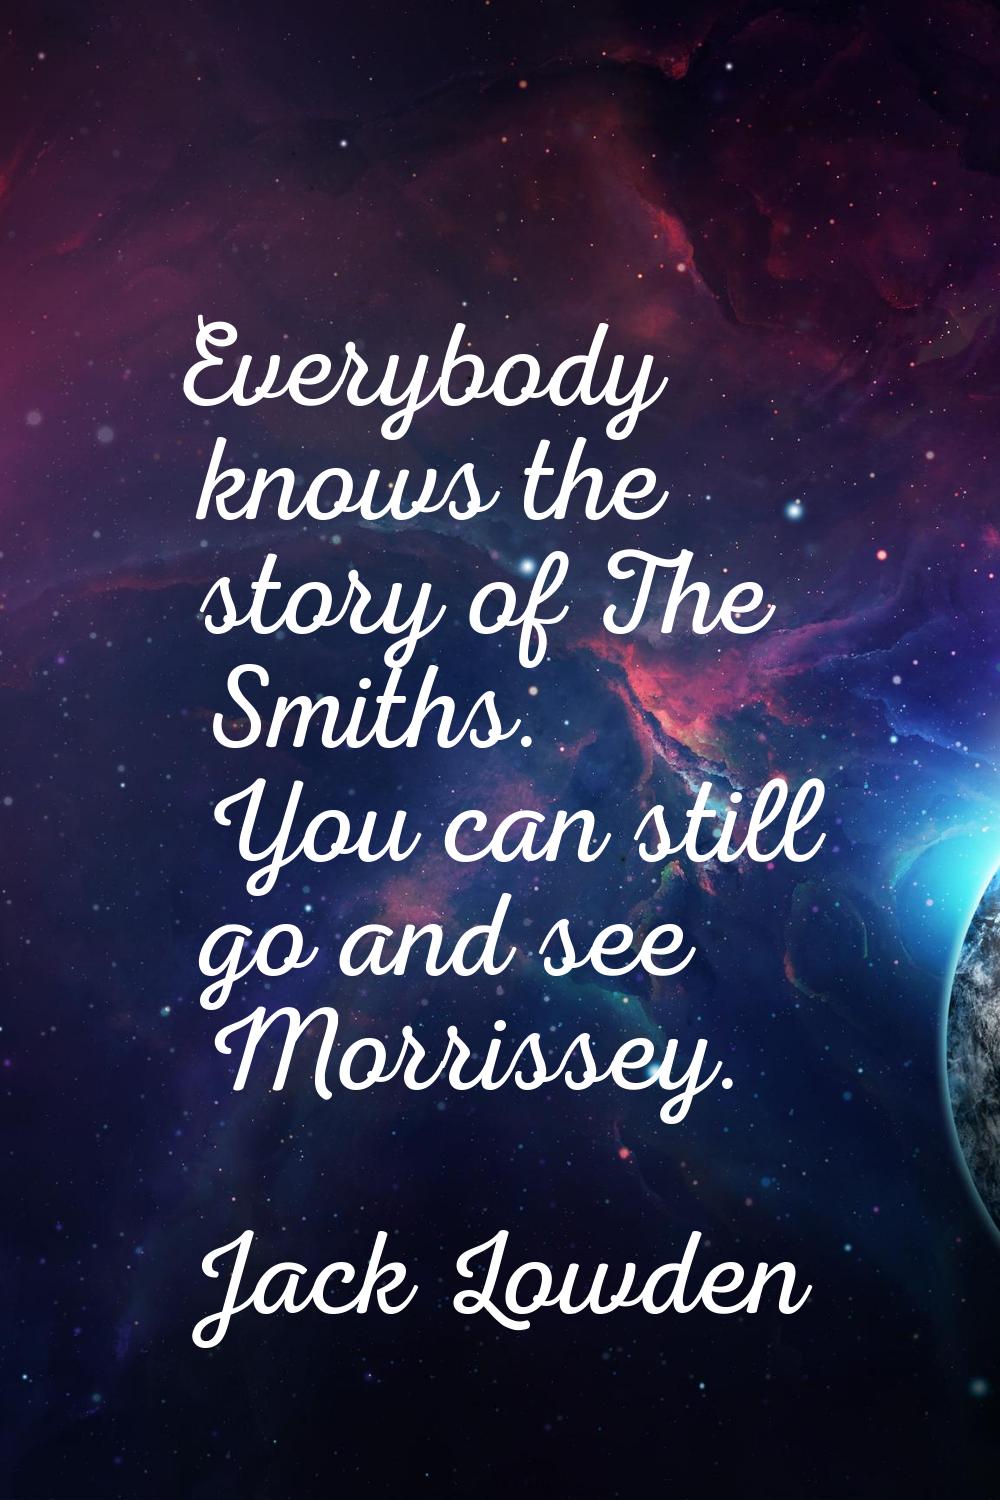 Everybody knows the story of The Smiths. You can still go and see Morrissey.